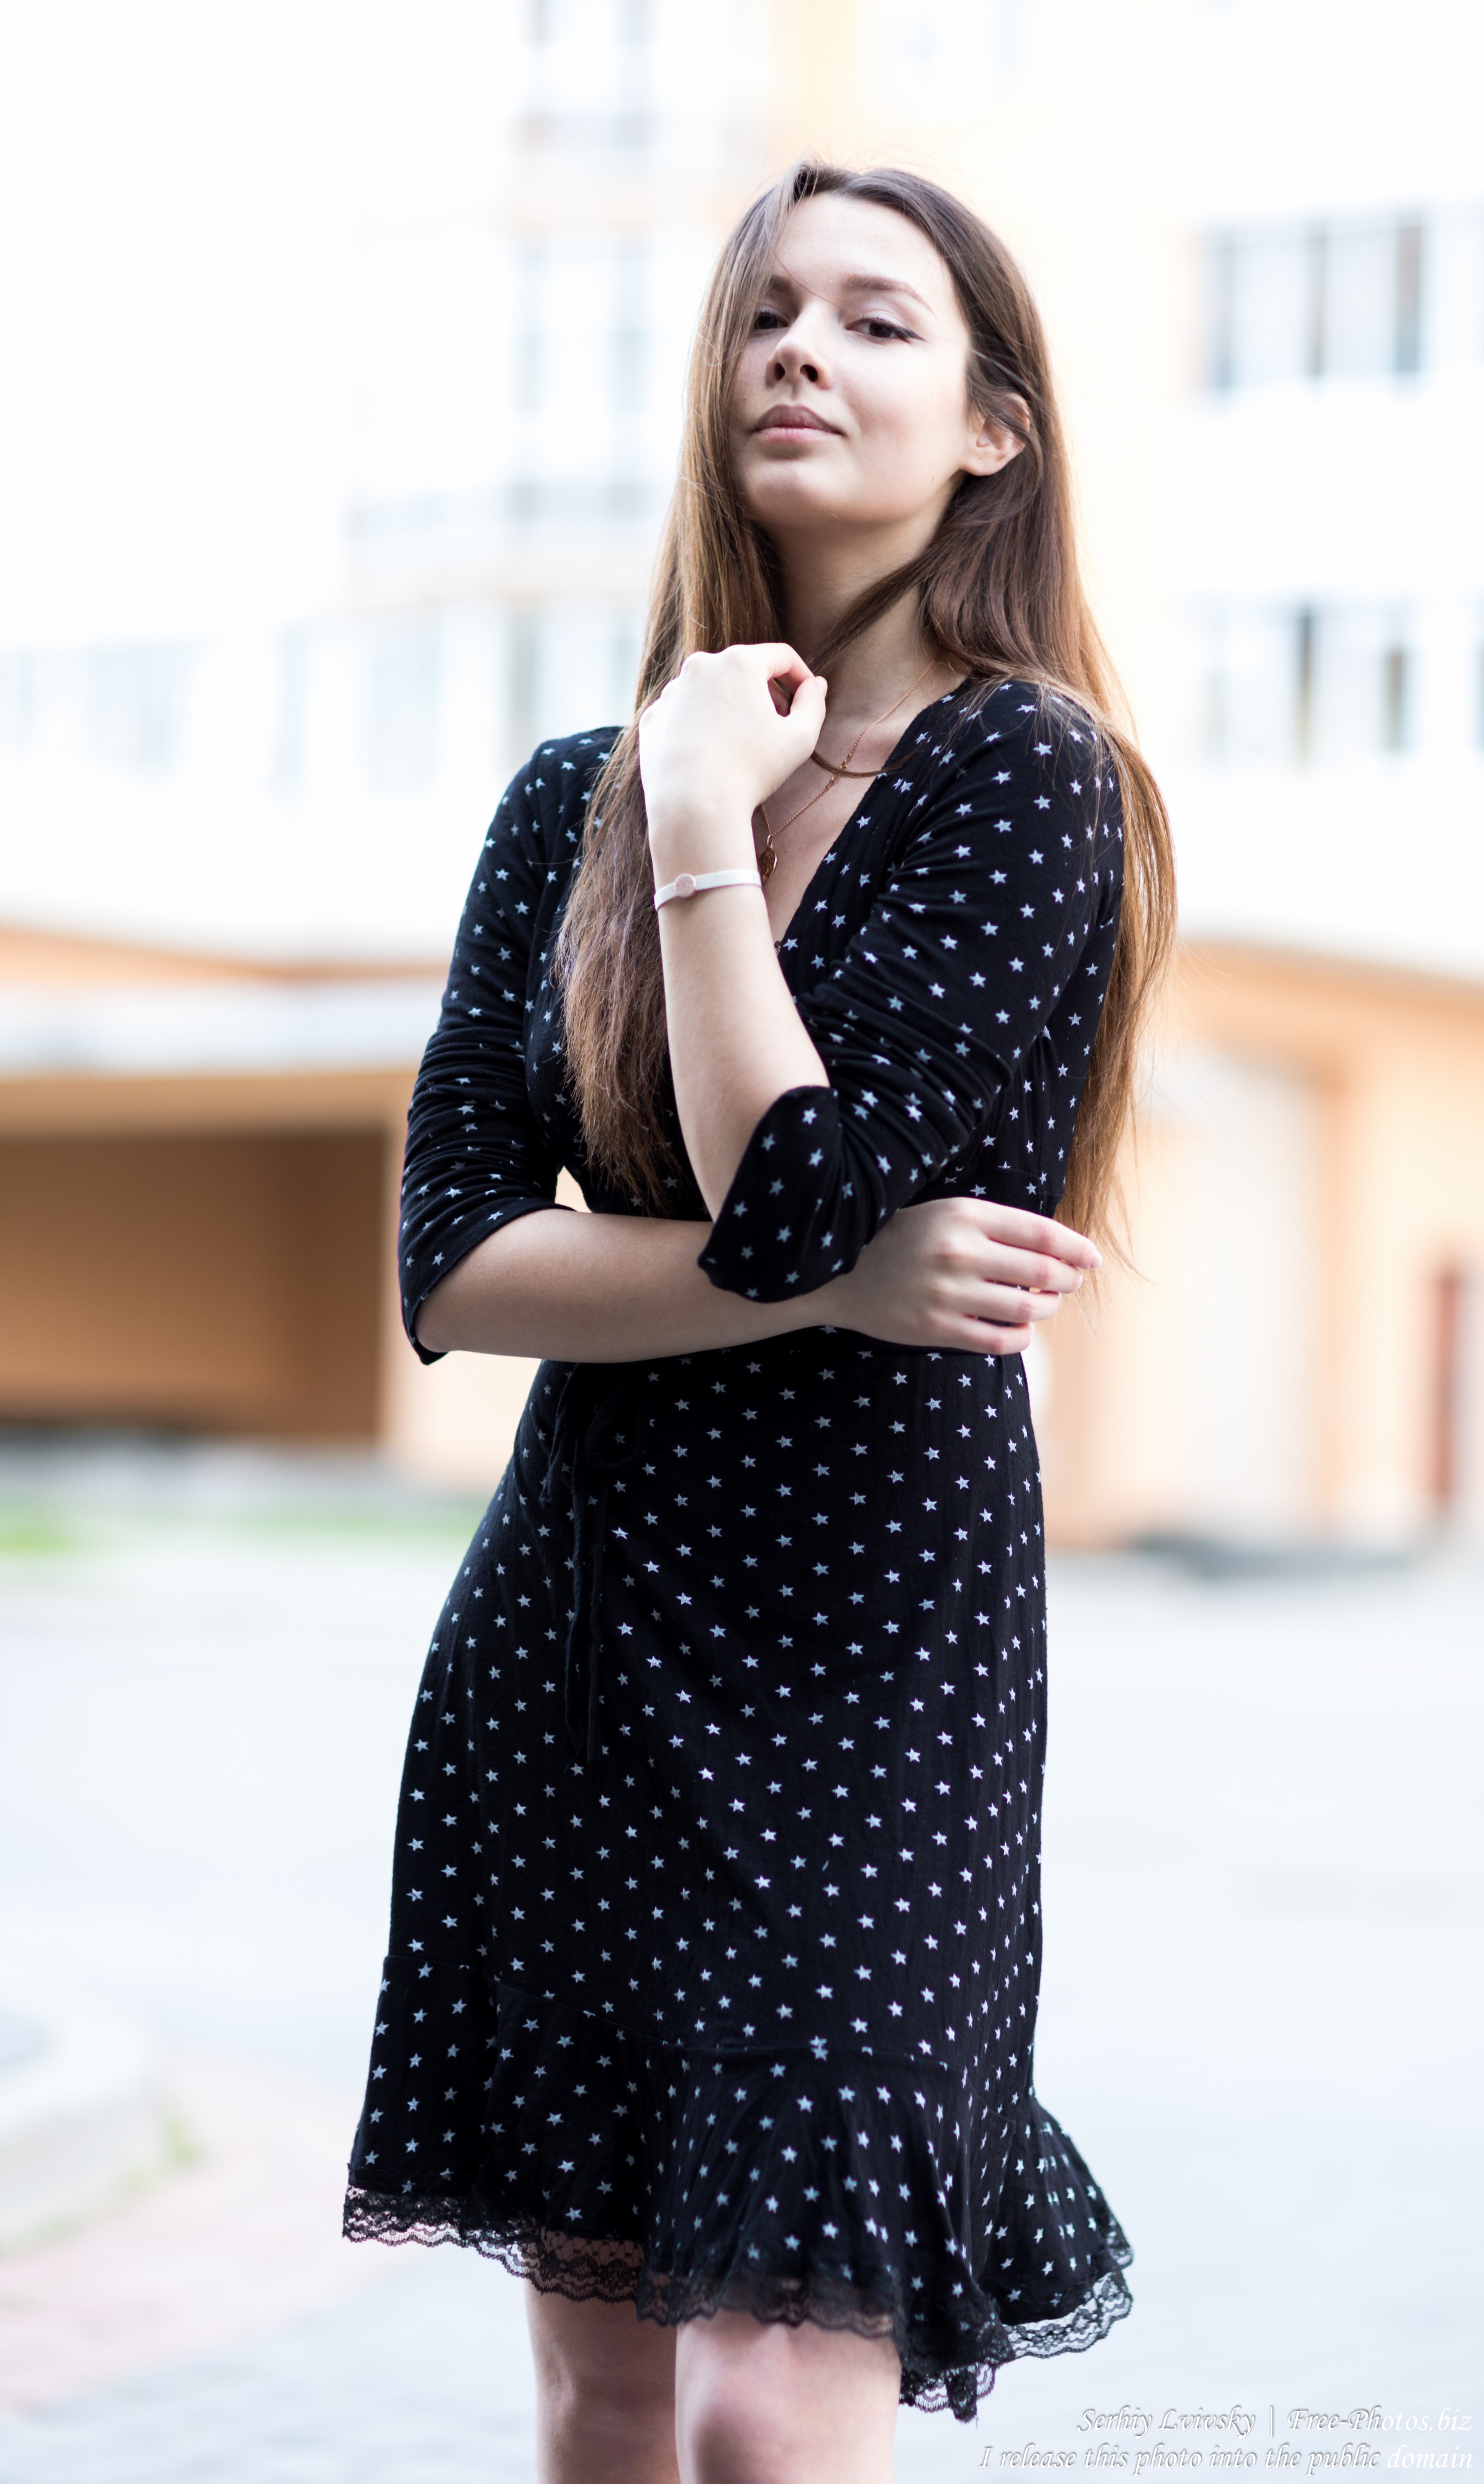 Photo Of Lida A 21 Year Old Girl Photographed In June 2020 By Serhiy Lvivsky Portrait 2